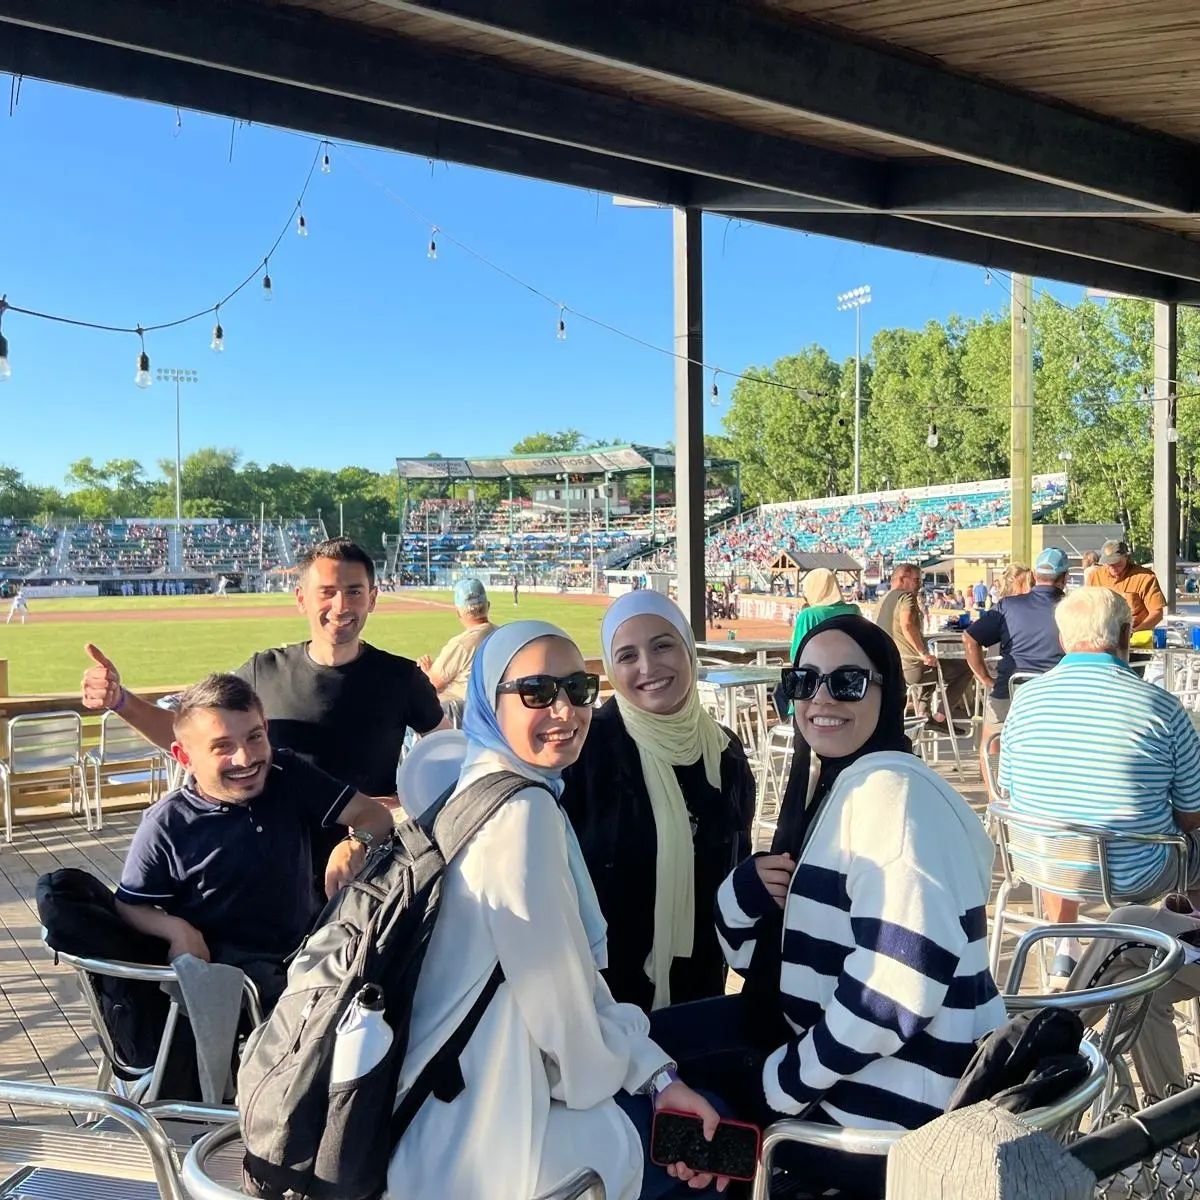 Had a great time at the Kalamazoo Growlers game with the Kalamazoo UJLEP cohort last night. Thanks so much to Disability Network Southwest Michigan for the tickets, and to Buthaina, Nuseibah, and Jodi for sharing these photos. ⚾

@irexinternational 
